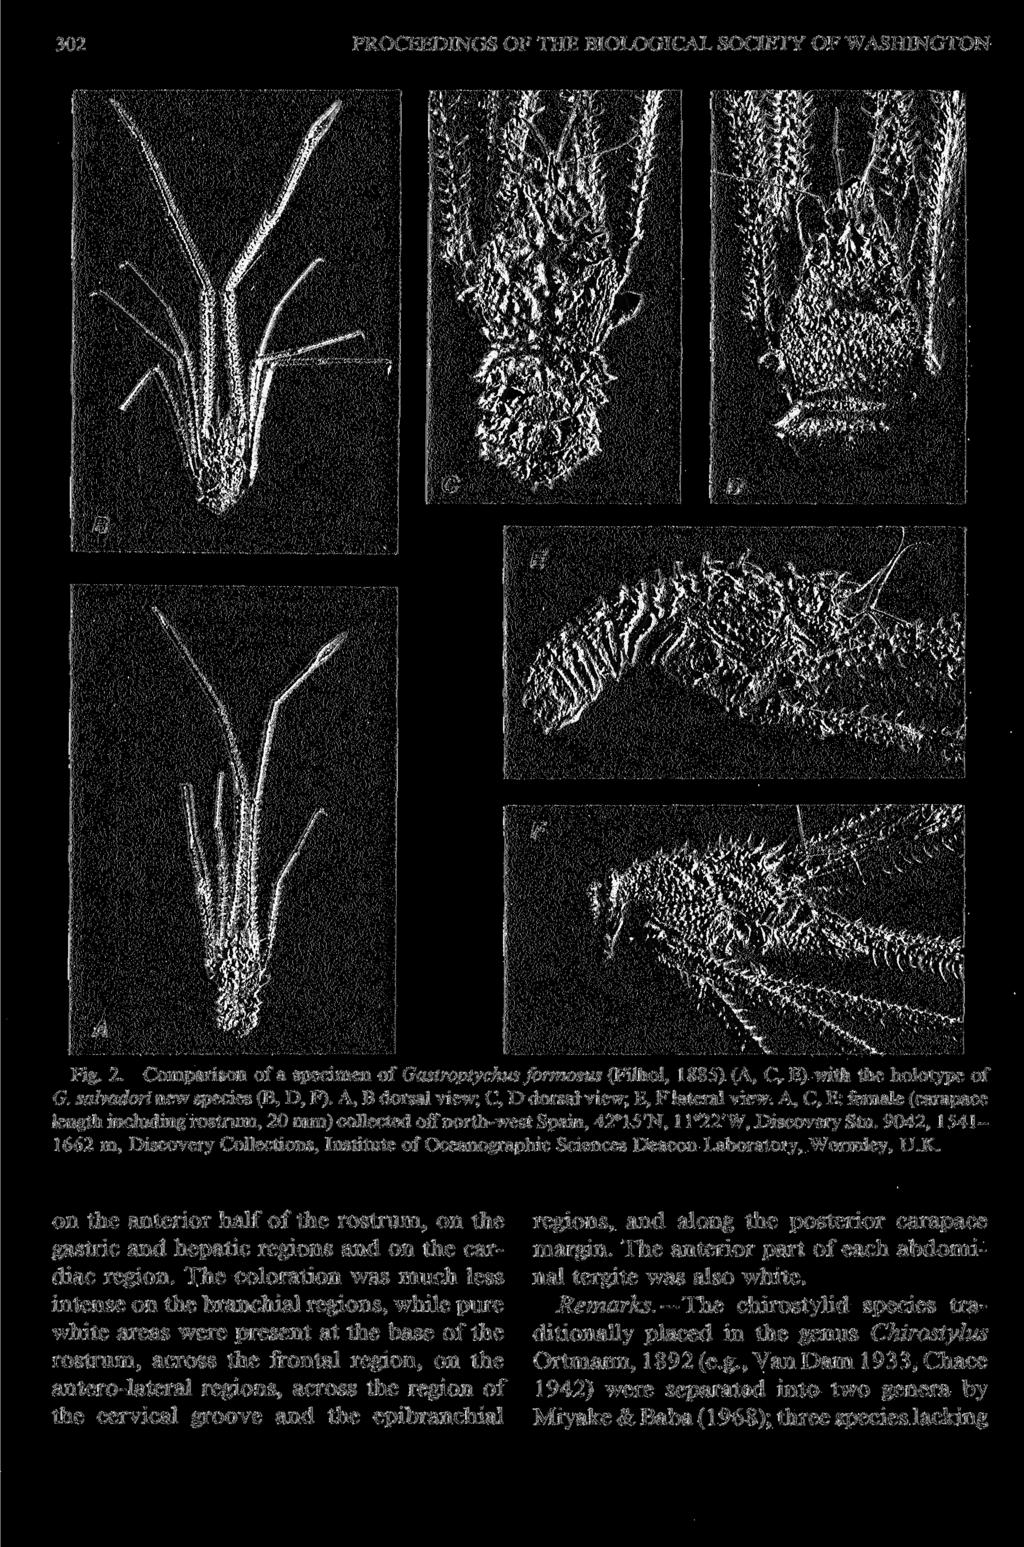 302 PROCEEDINGS OF THE BIOLOGICAL SOCIETY OF WASHINGTON Fig. 2. Comparison of a specimen of Gastroplychus formosus (Filhol, 1885) (A, C, E) with the holotype of G. salvadori new species (B, D, F).